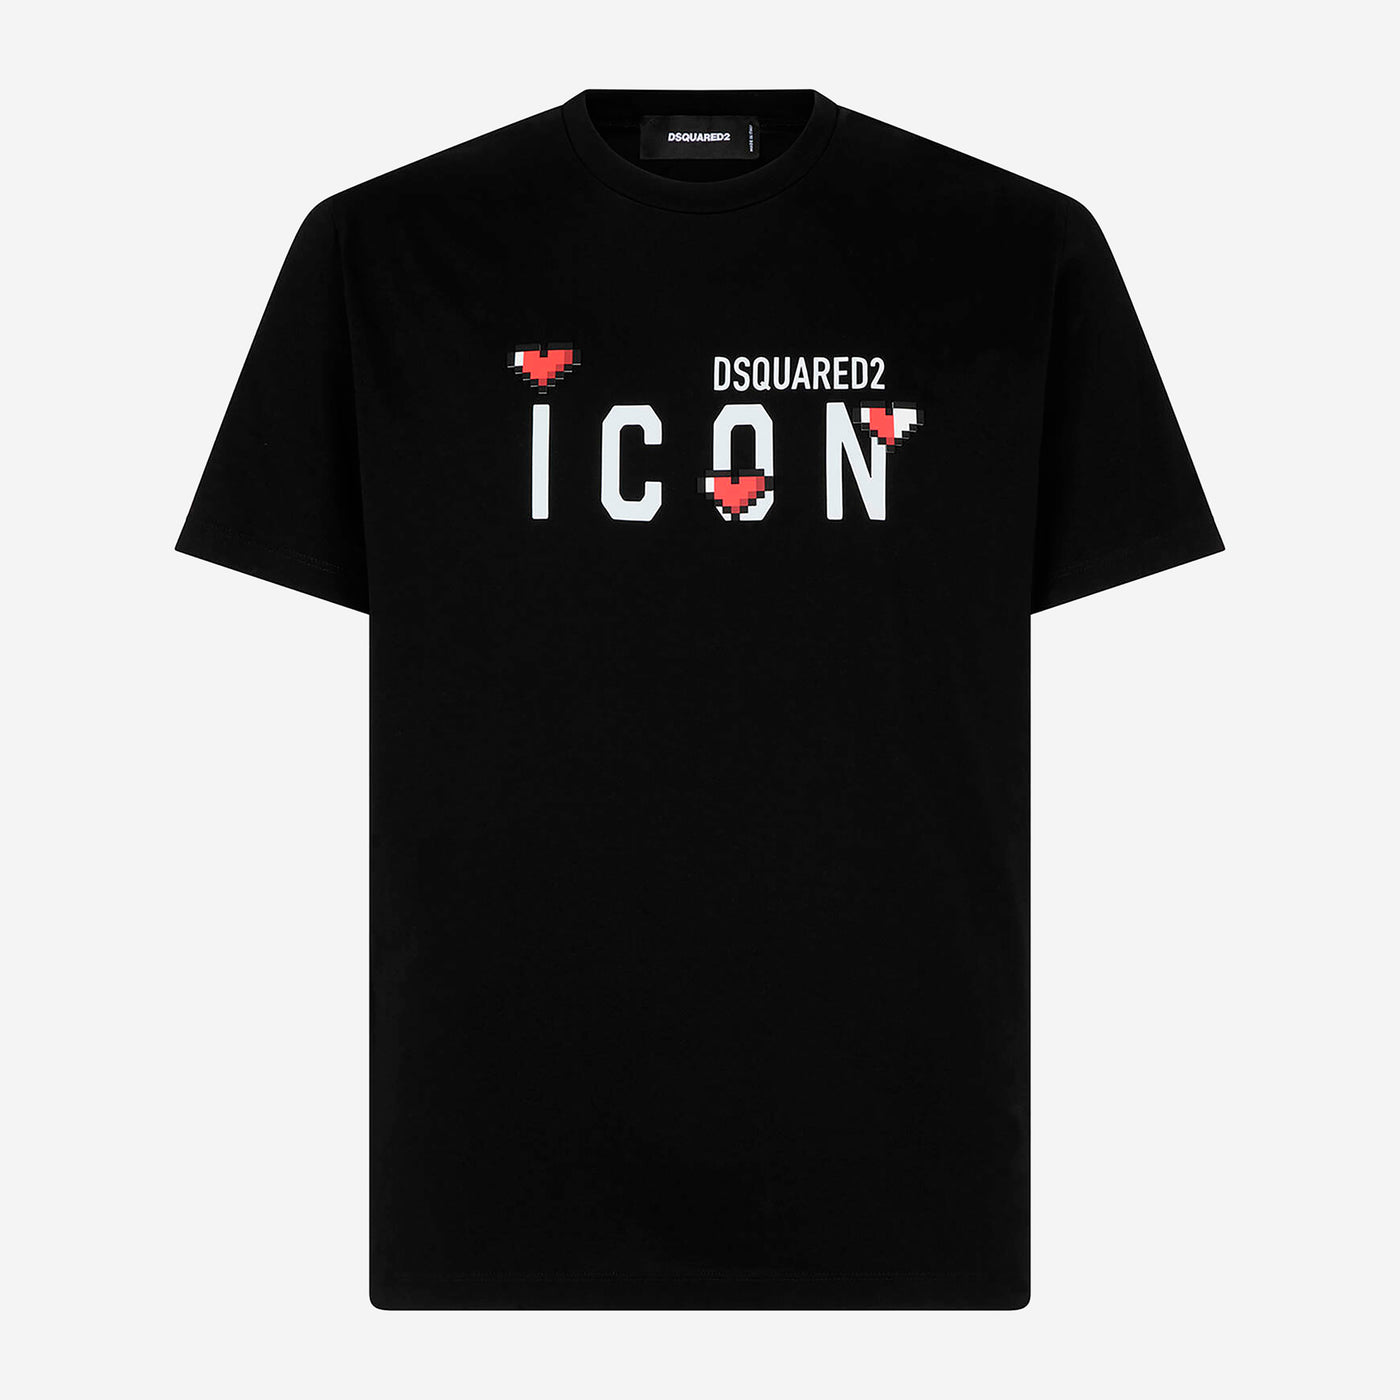 DSquared2 ICON Heart Pixel T-Shirt